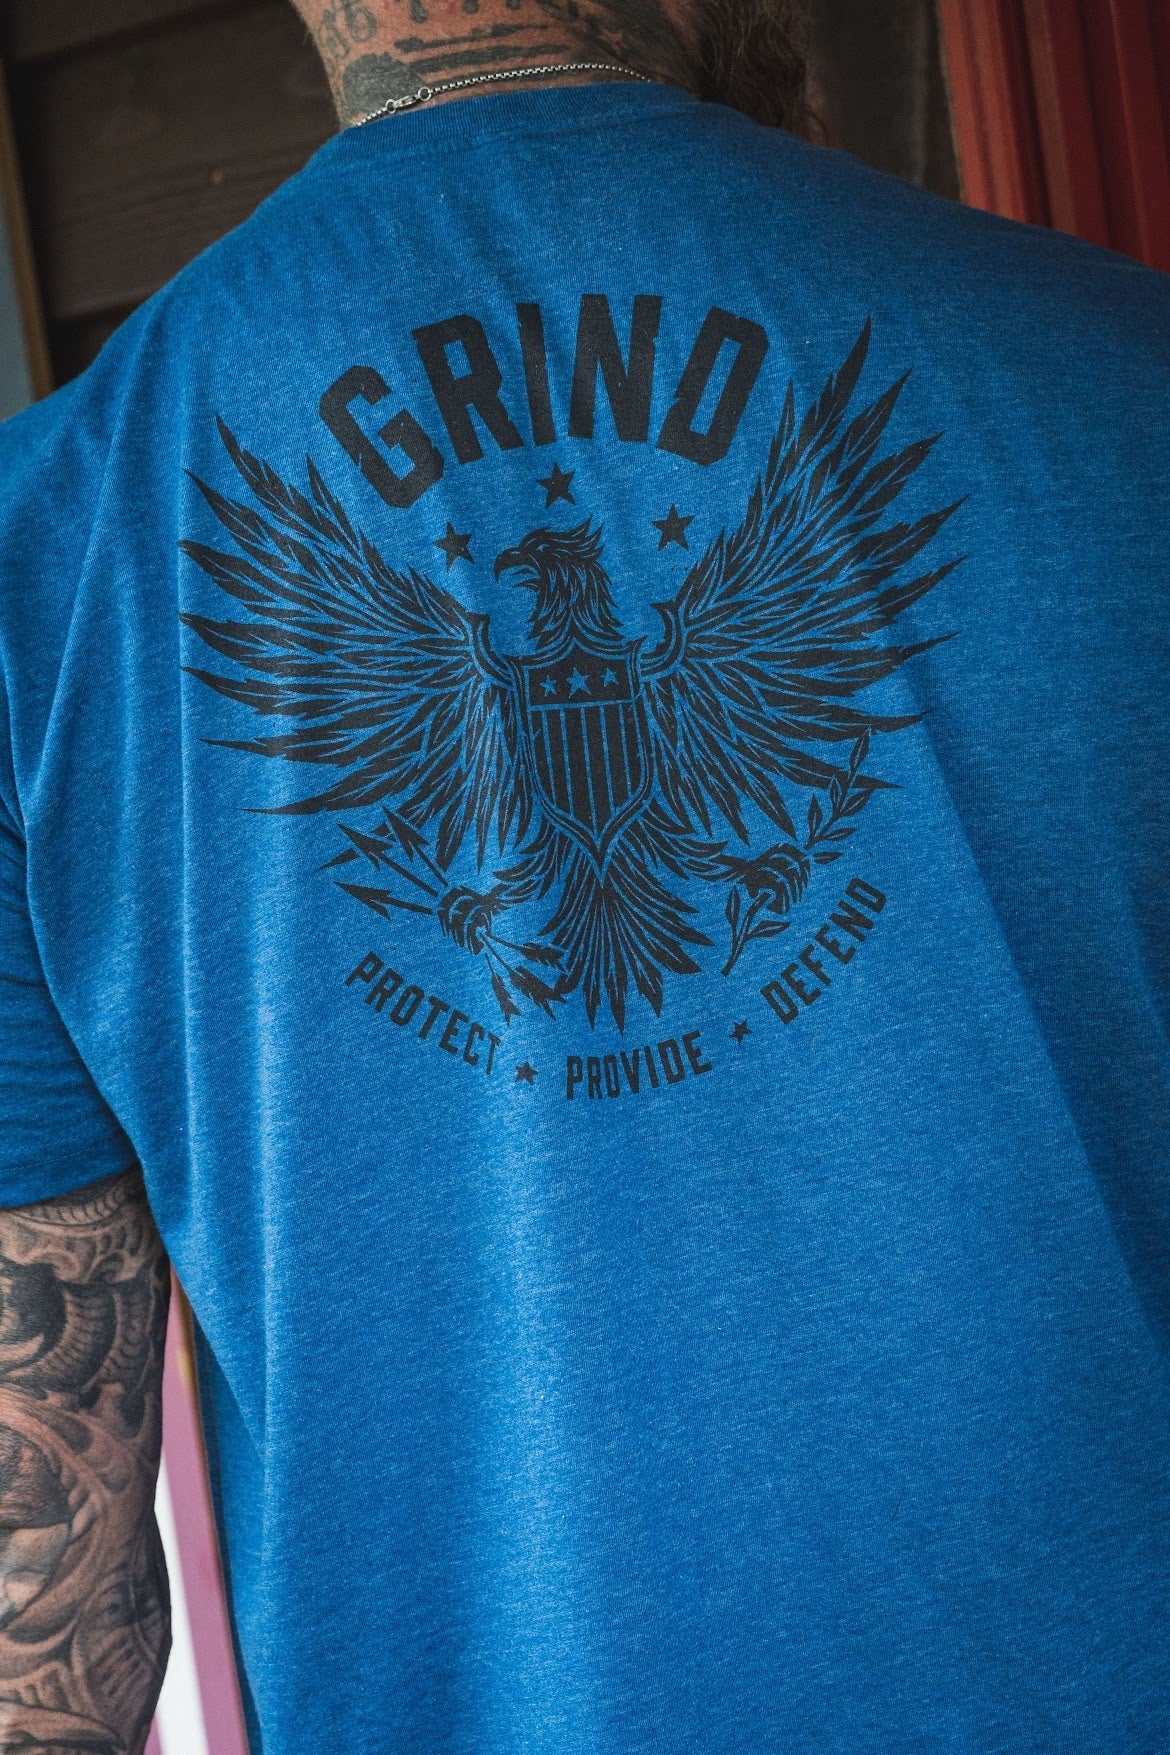 The Grind Athletics Protect Provide & Defend